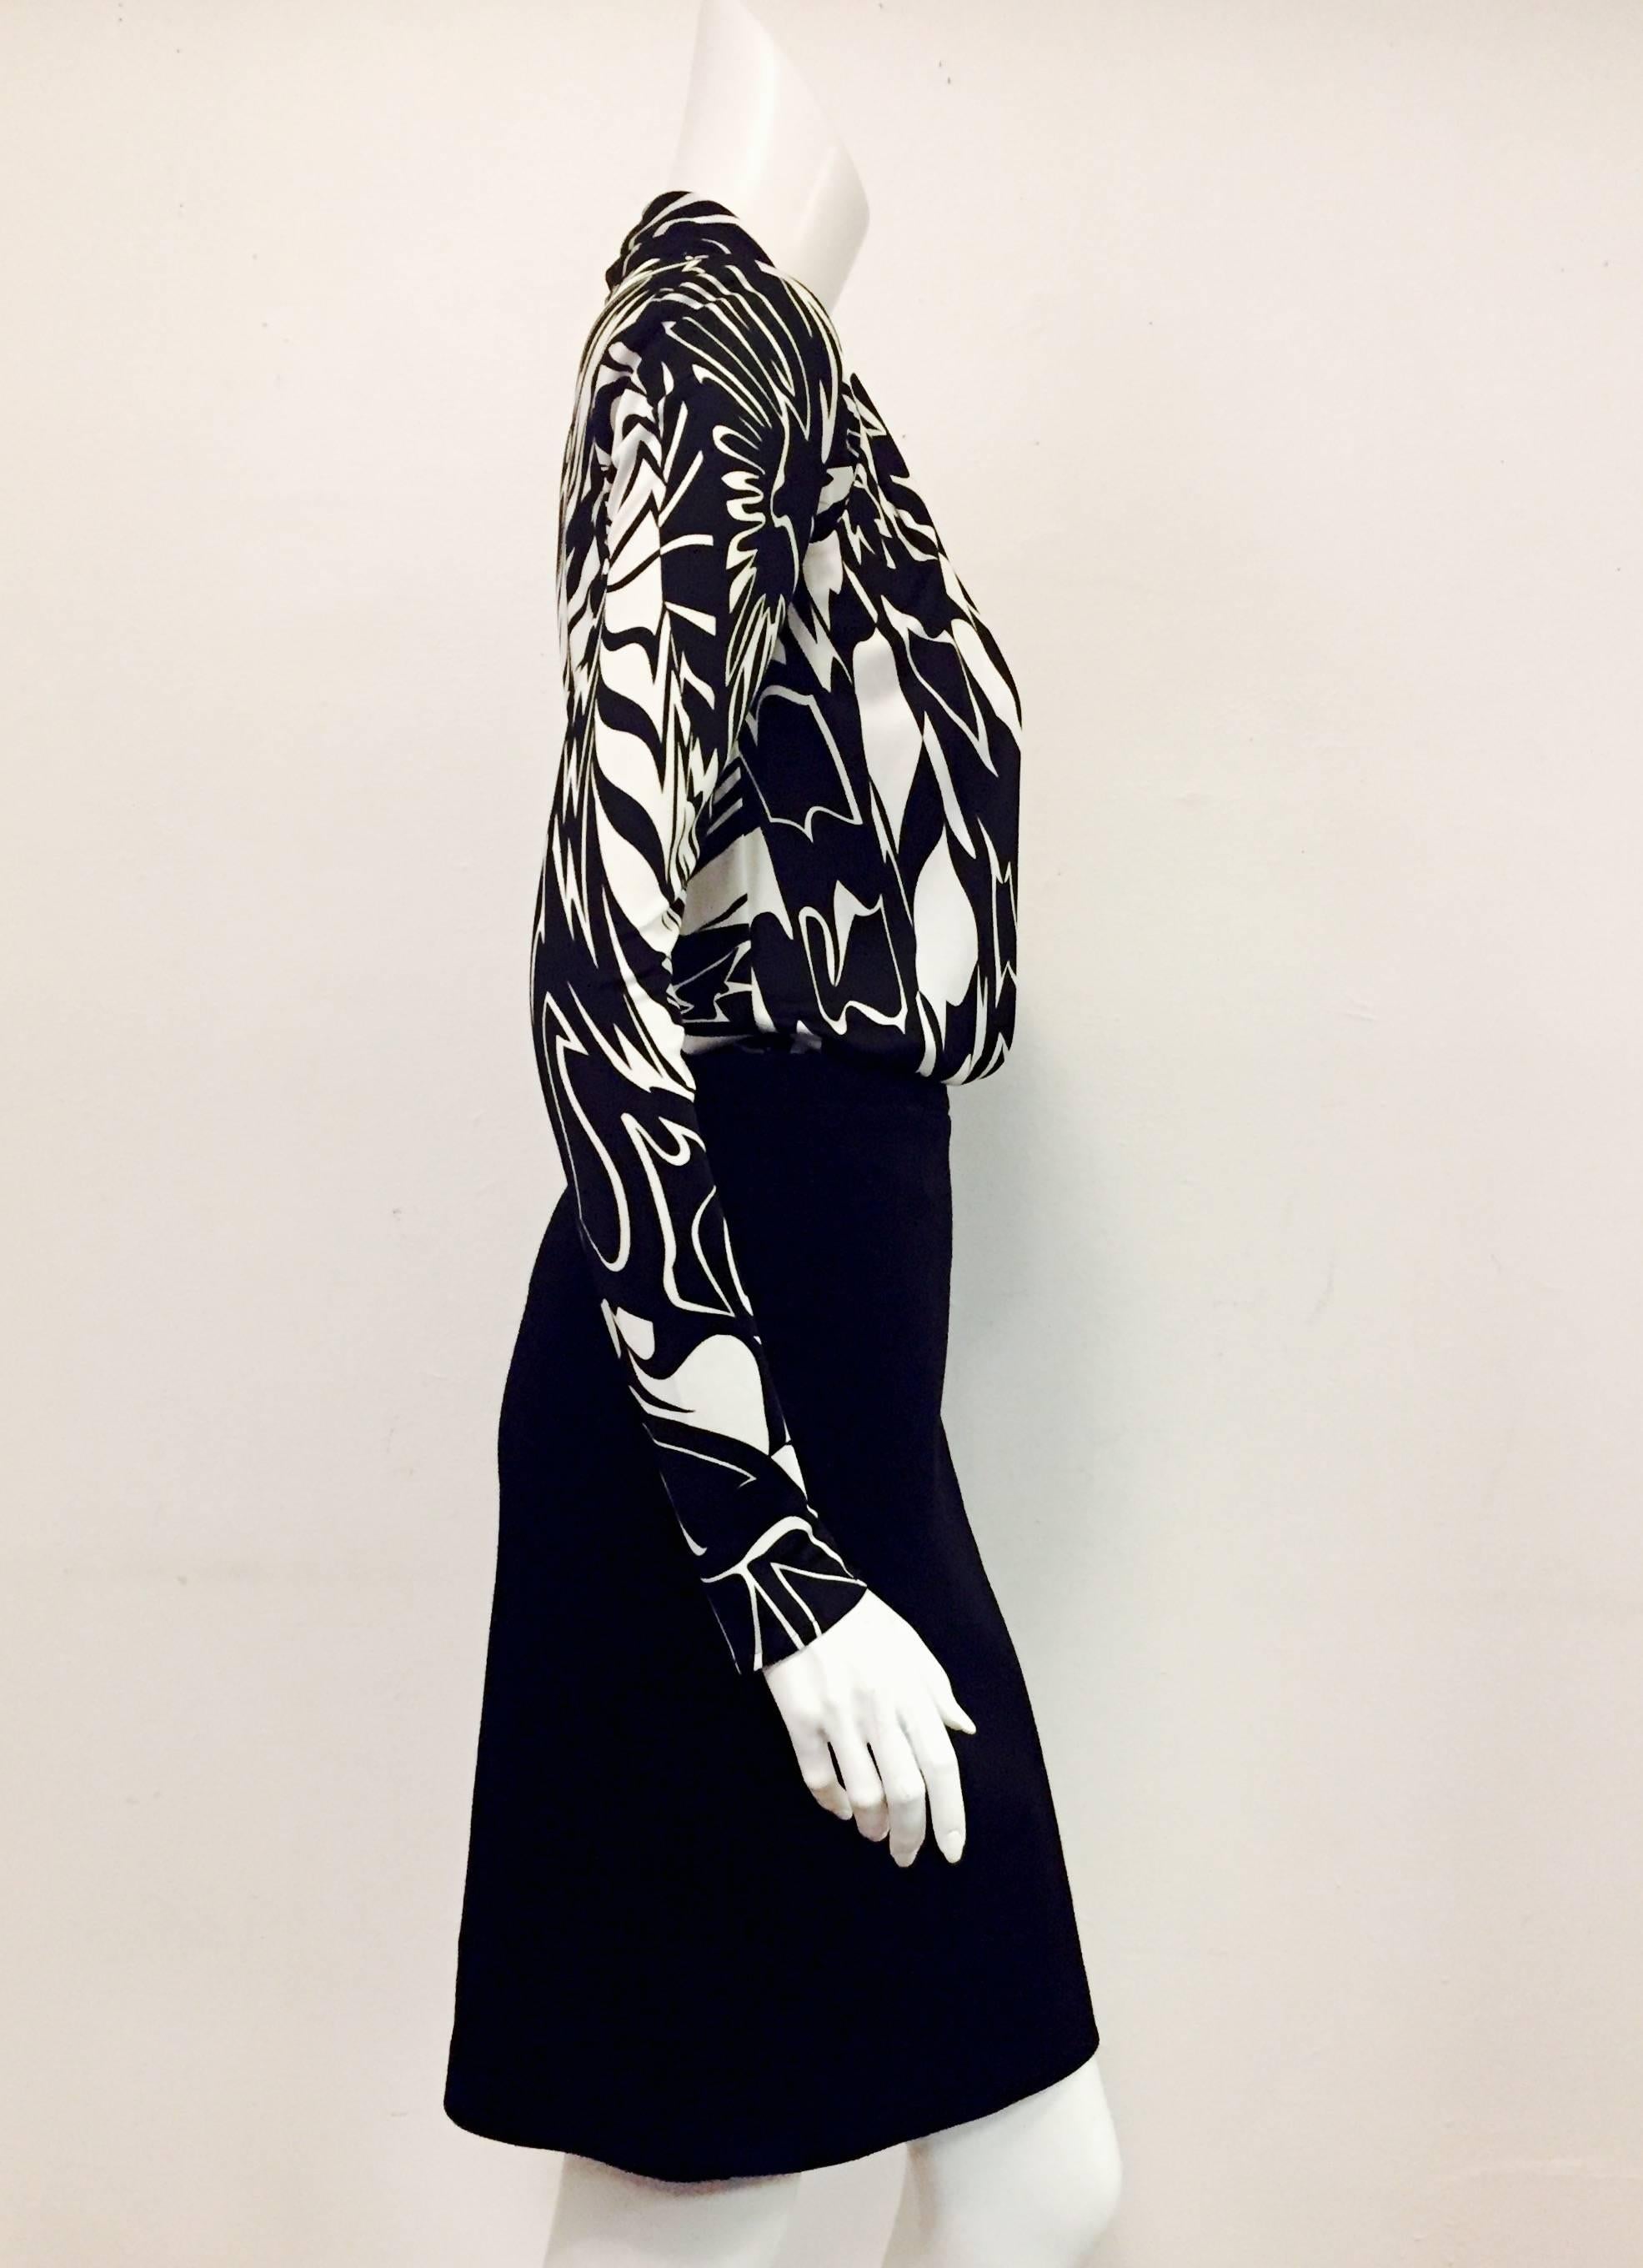 Extravagant Emilio's original design for this black and white long sleeve color block dress is creative and captivating!  The top has intricate abstract pattern and is construction with a faux vest and long sleeves.  This dress features a loose